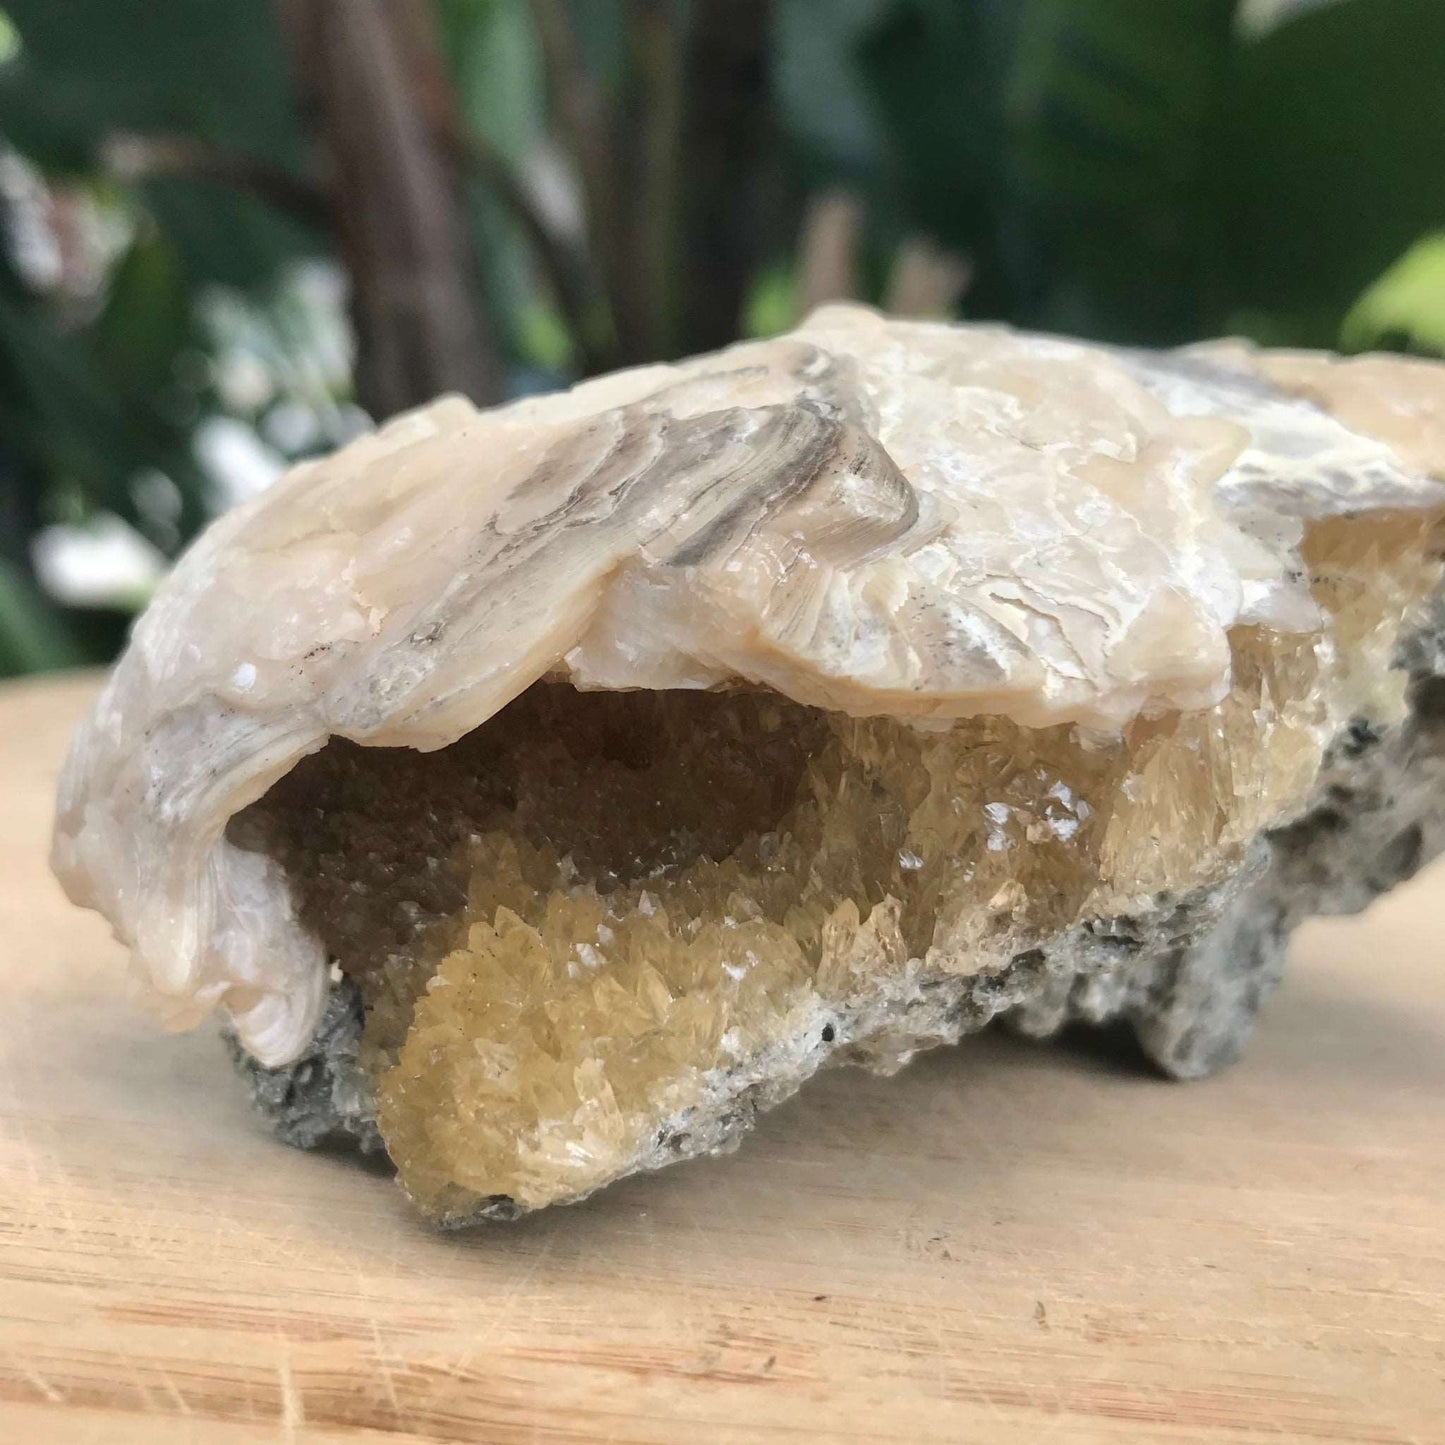 Honey Calcite Crystals in Fossilized Clam Shell